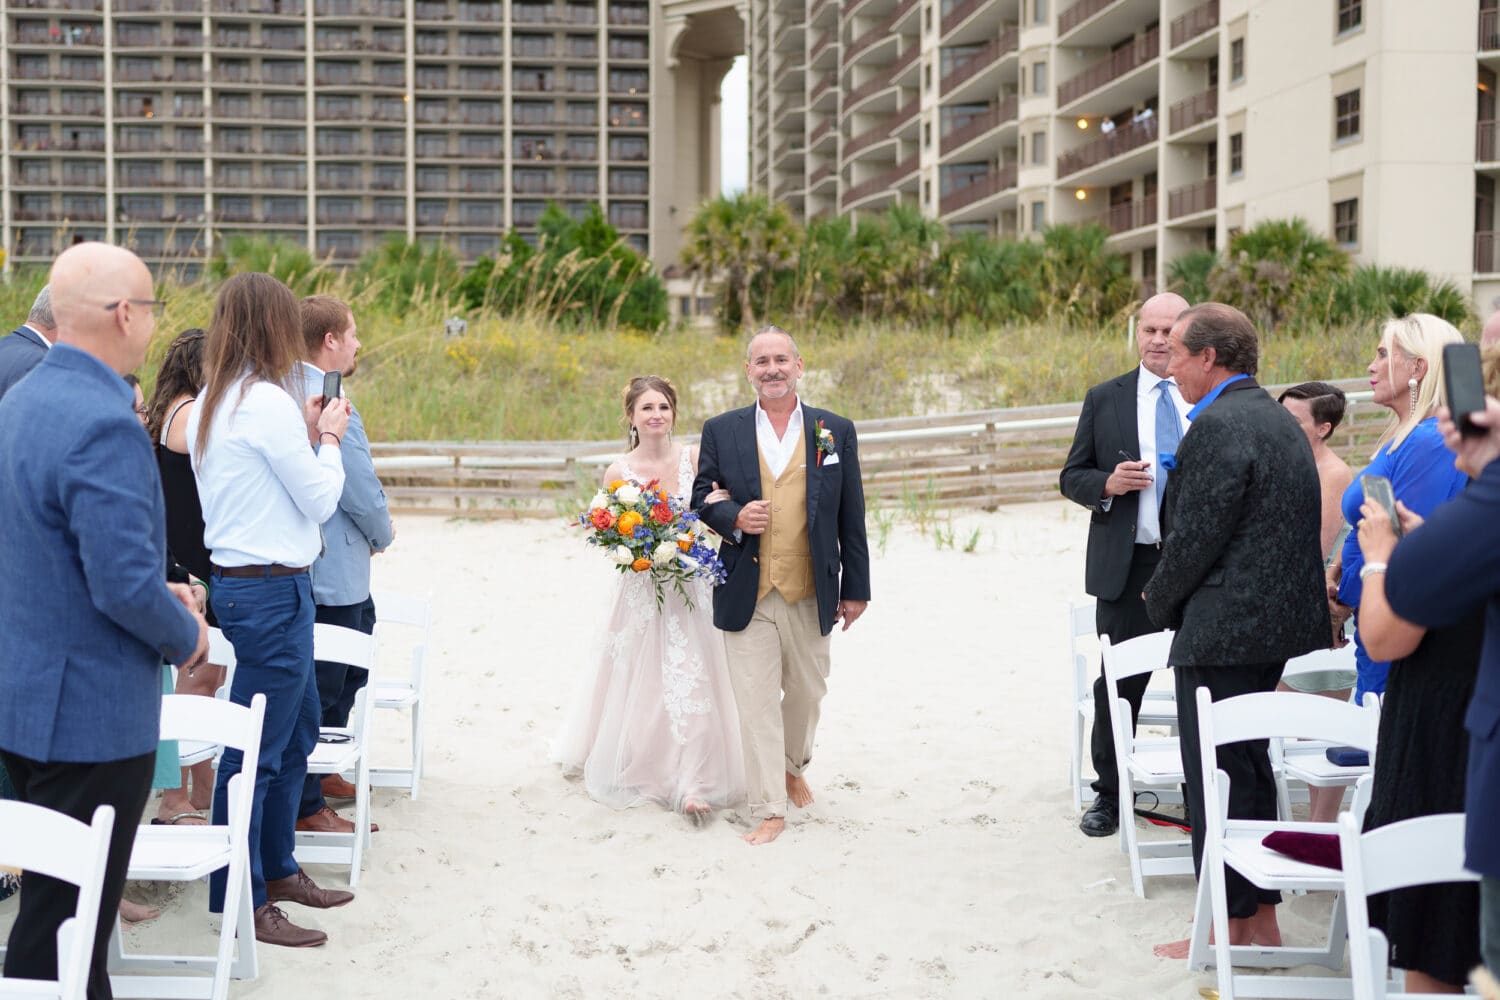 Father walking bride down the aisle - 21 Main Events - North Myrtle Beach